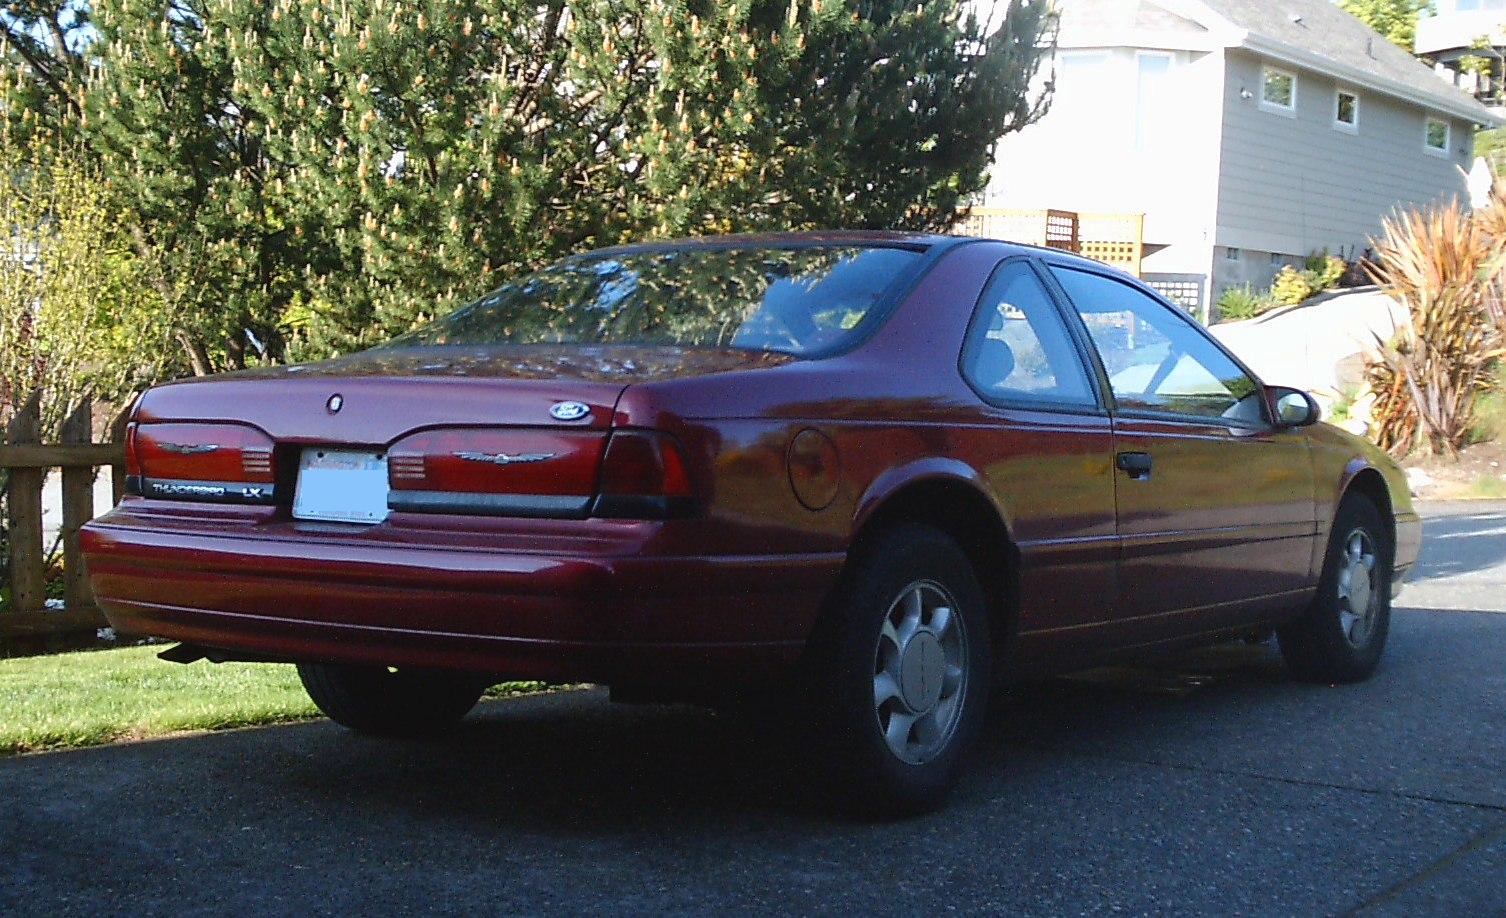 1993 Ford thunderbird lx coupe specs #3